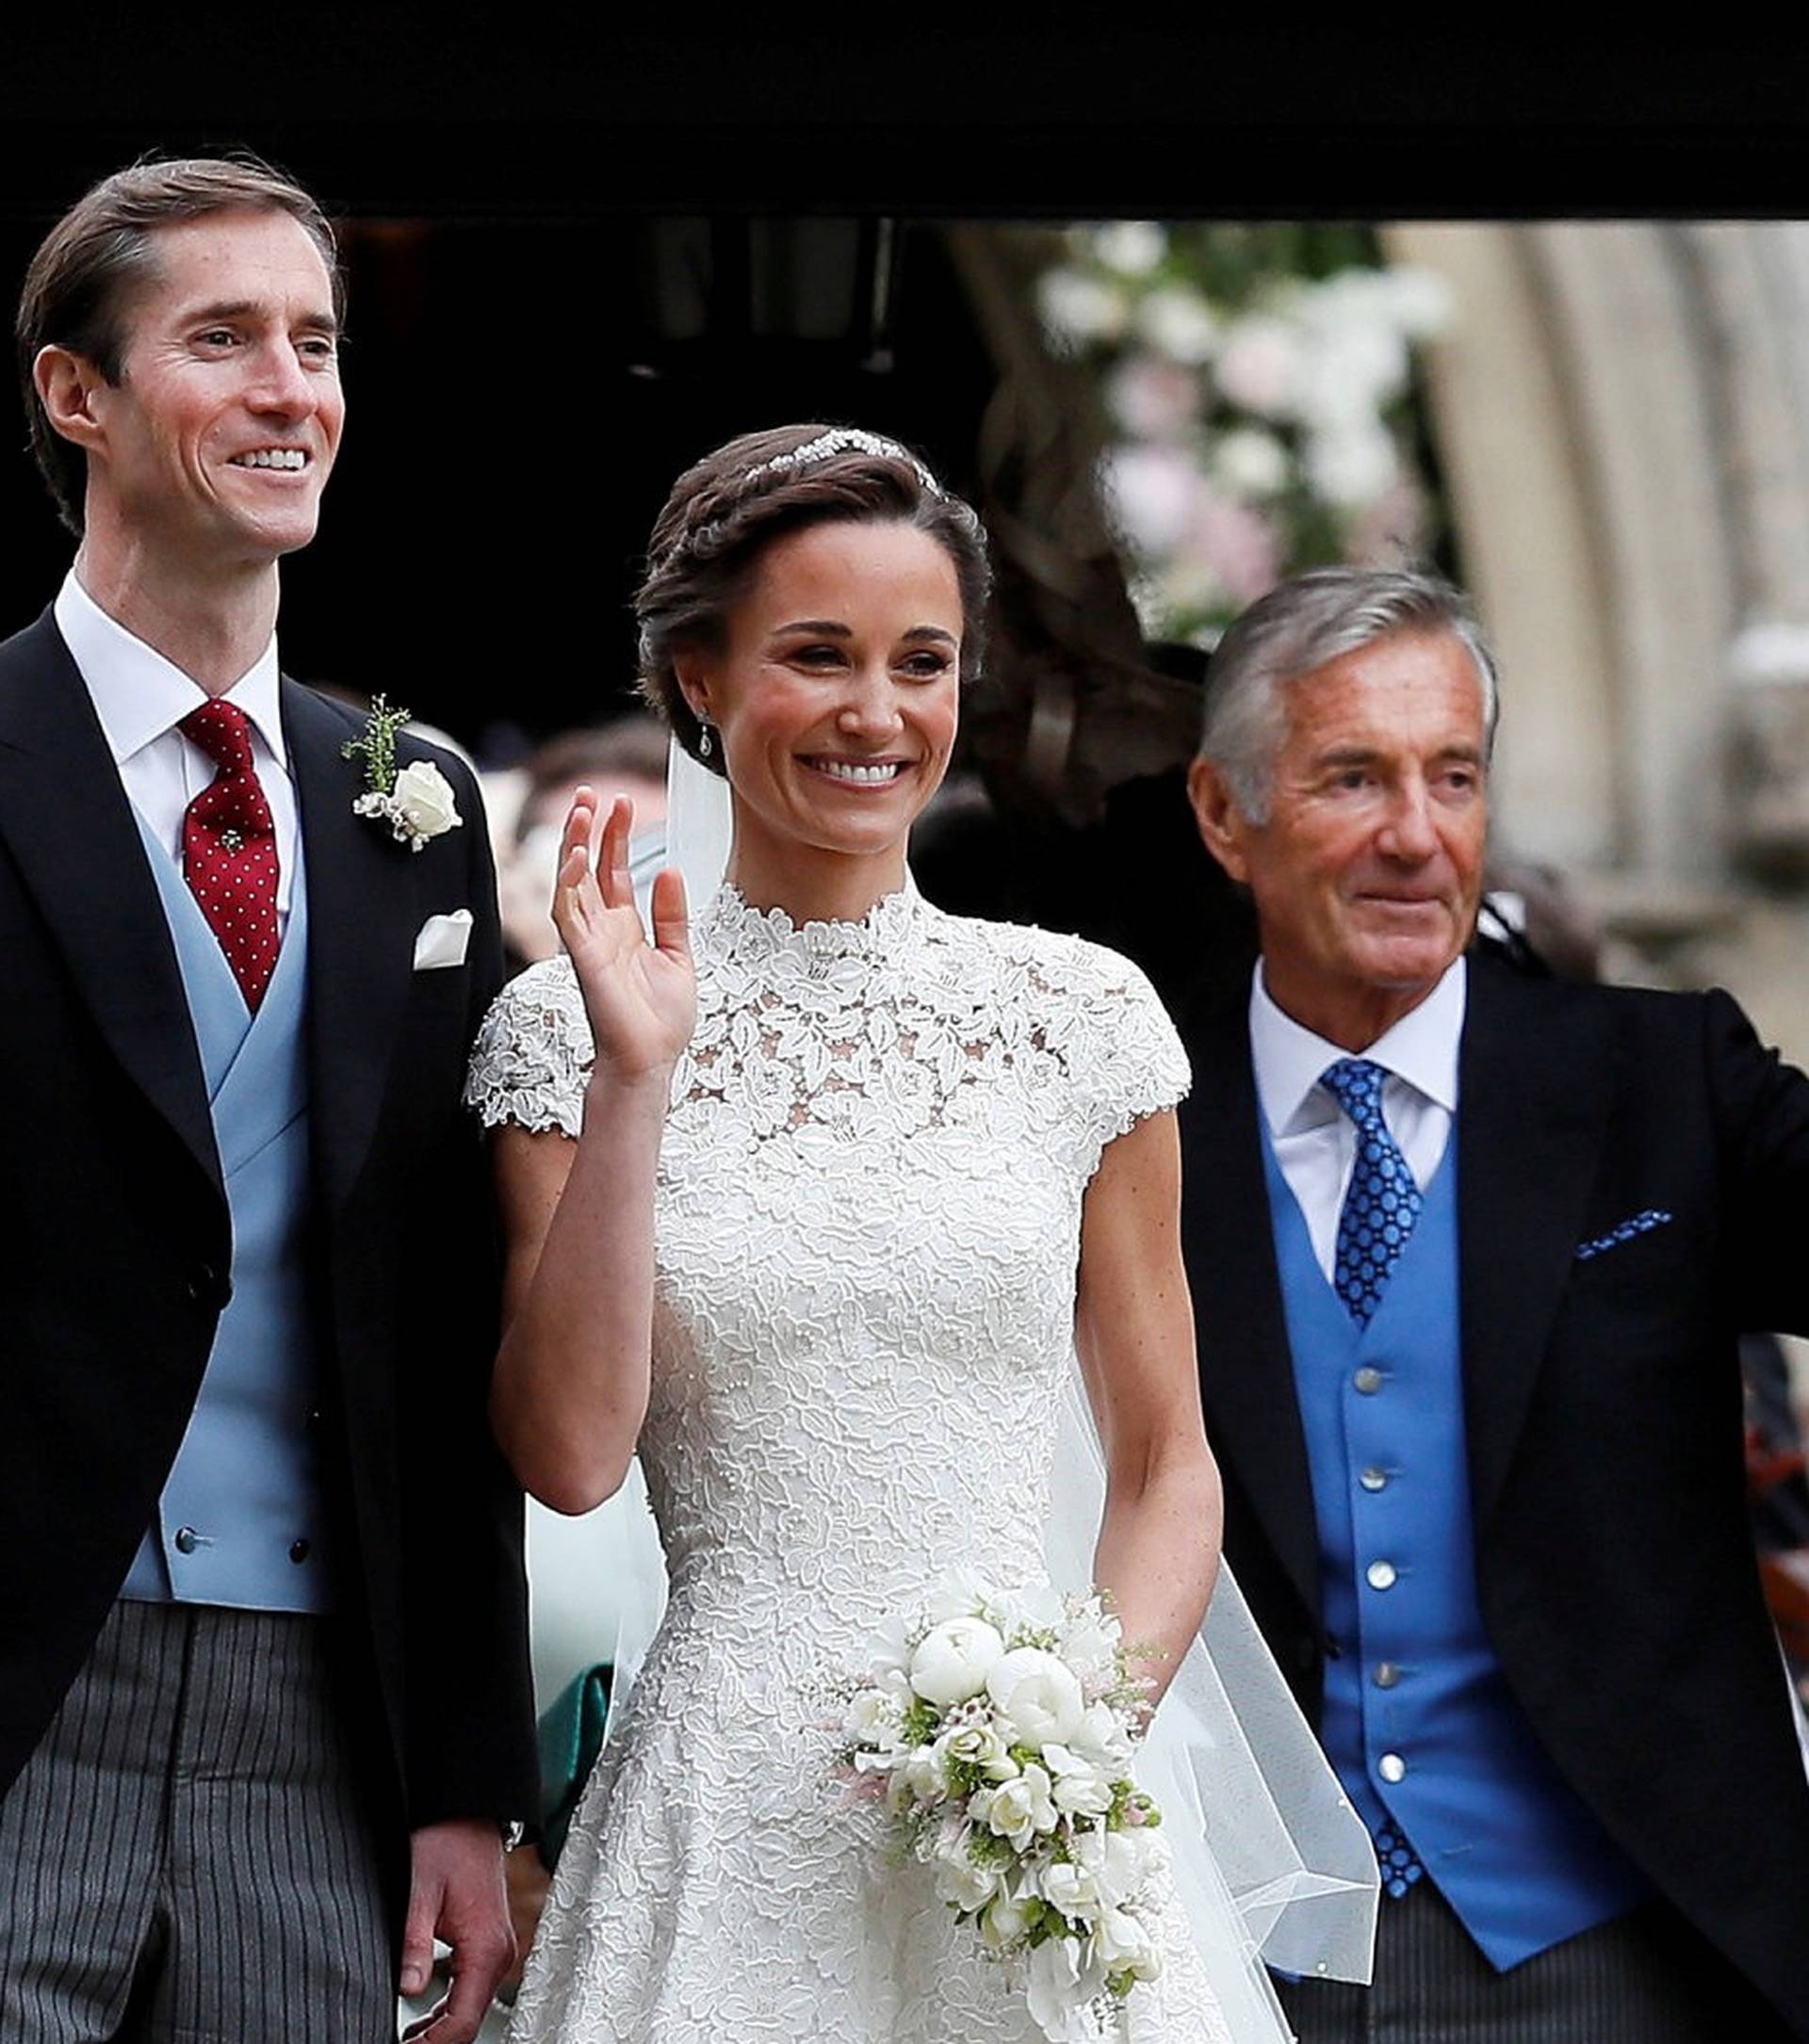 FILE PHOTO: Pippa Middleton and James Matthews pose for photographs after their wedding at St Mark's Church in Englefield